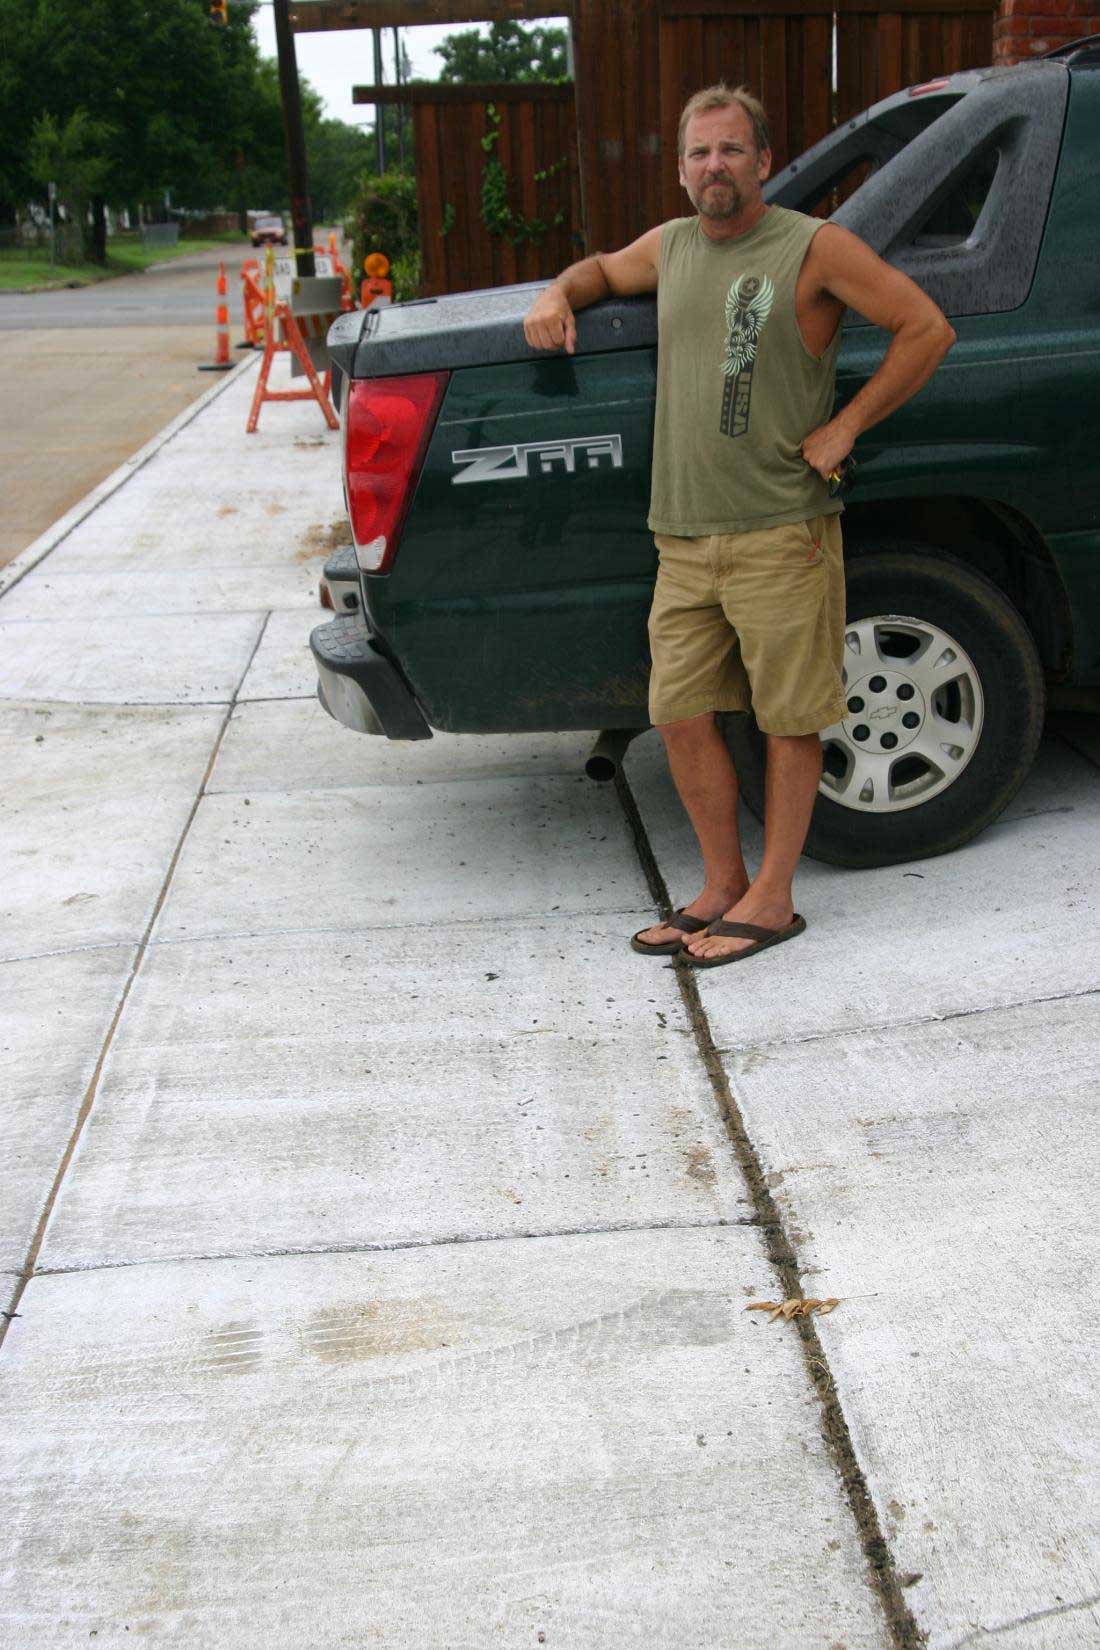 Brian Bentley’s vehicle no longer fits legally in the driveway after the city poured a sidewalk. Jeff Prince